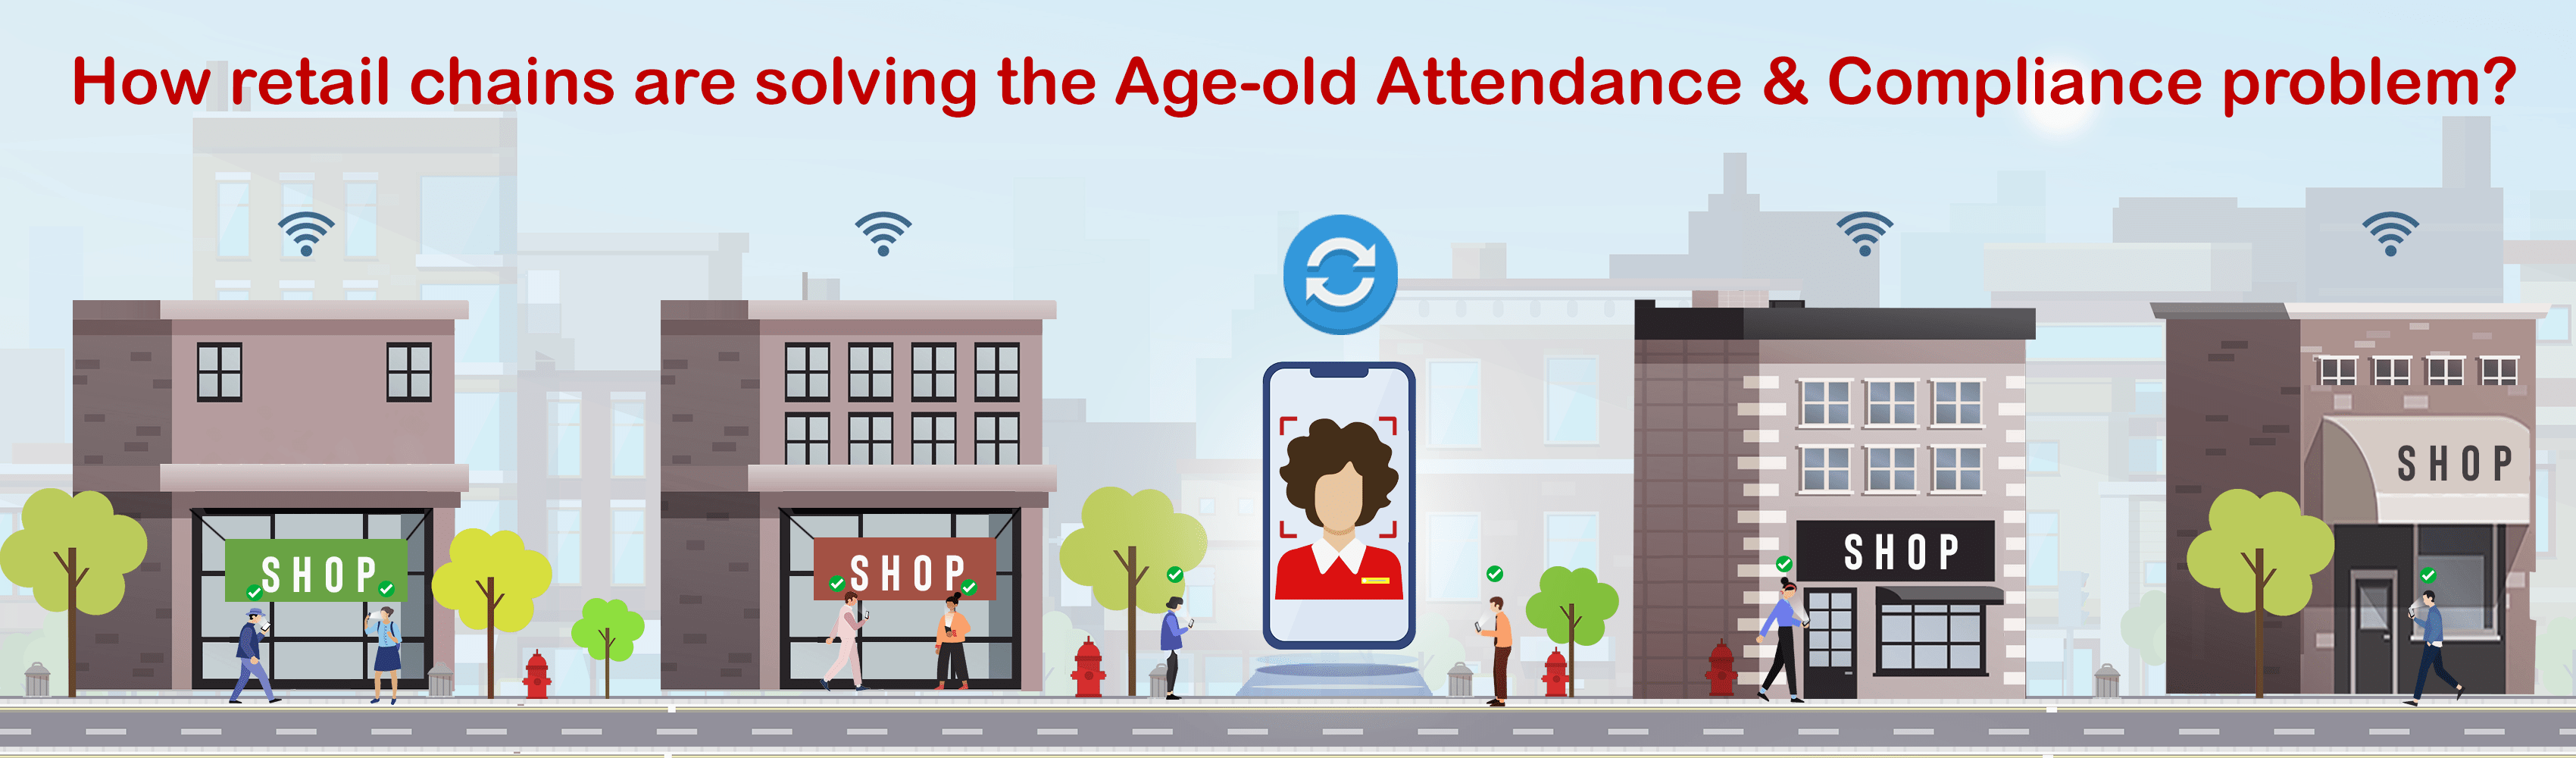 How retail chains are solving the age-old attendance & compliance problem?